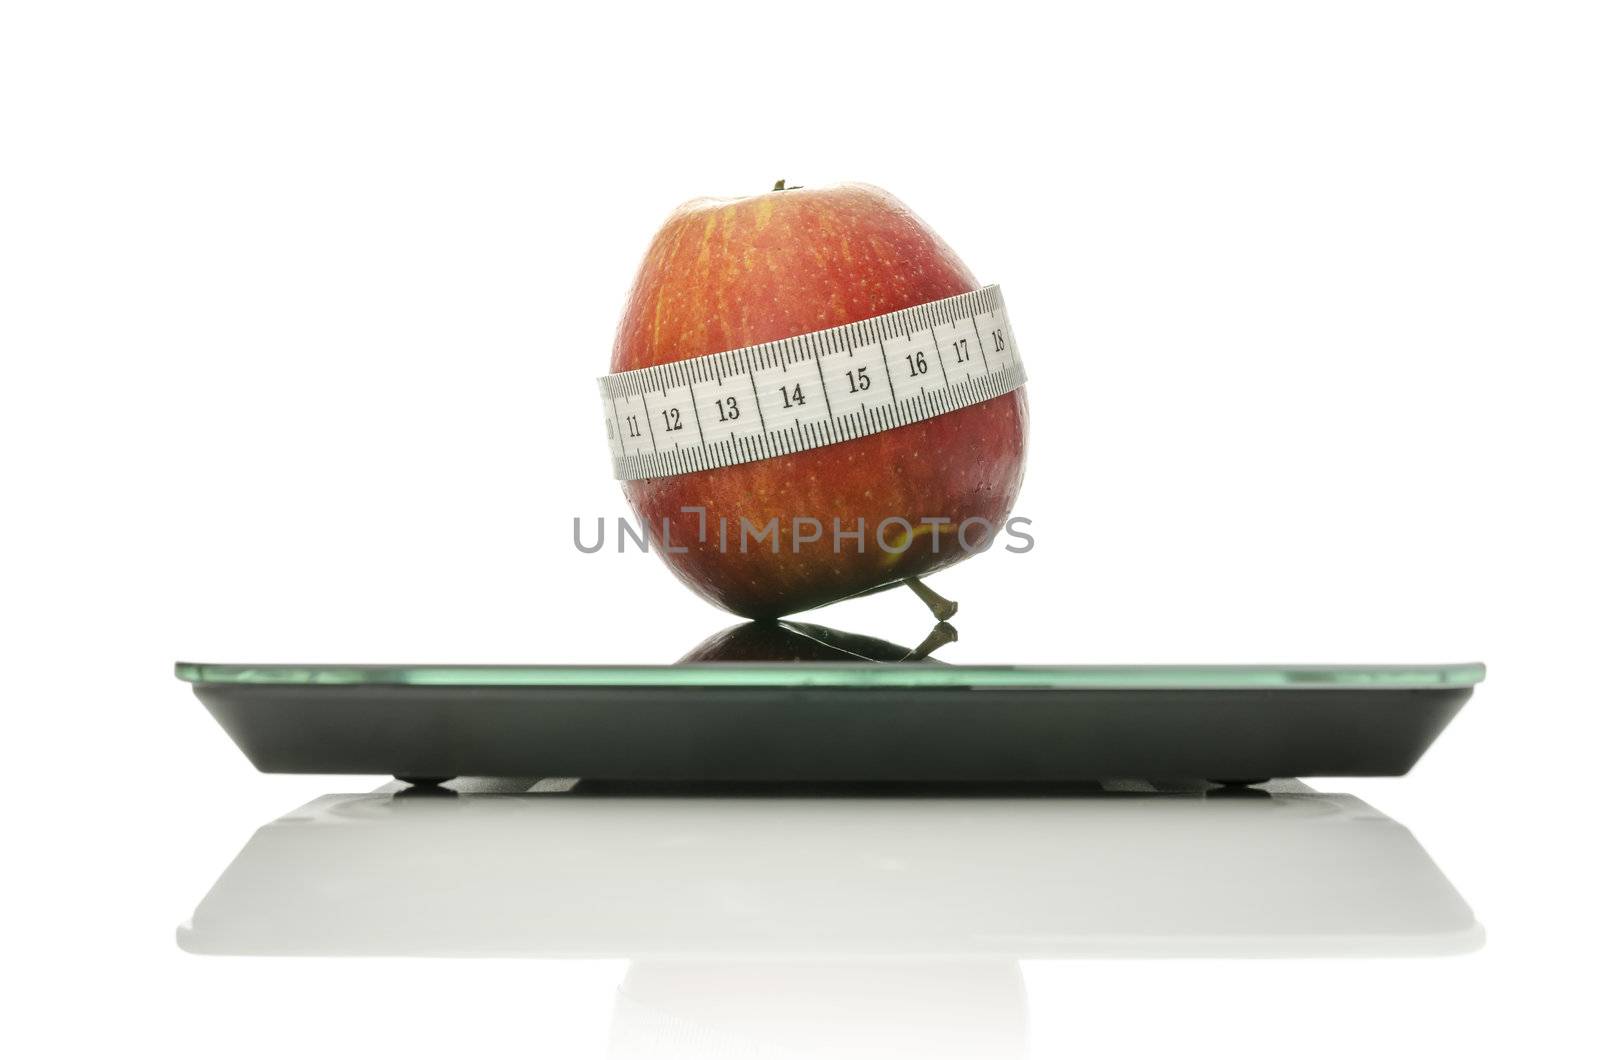 Apple wrapped with measuring tape on a digital kitchen scale. Isolated over white background.Concept of dieting and healthy eating.